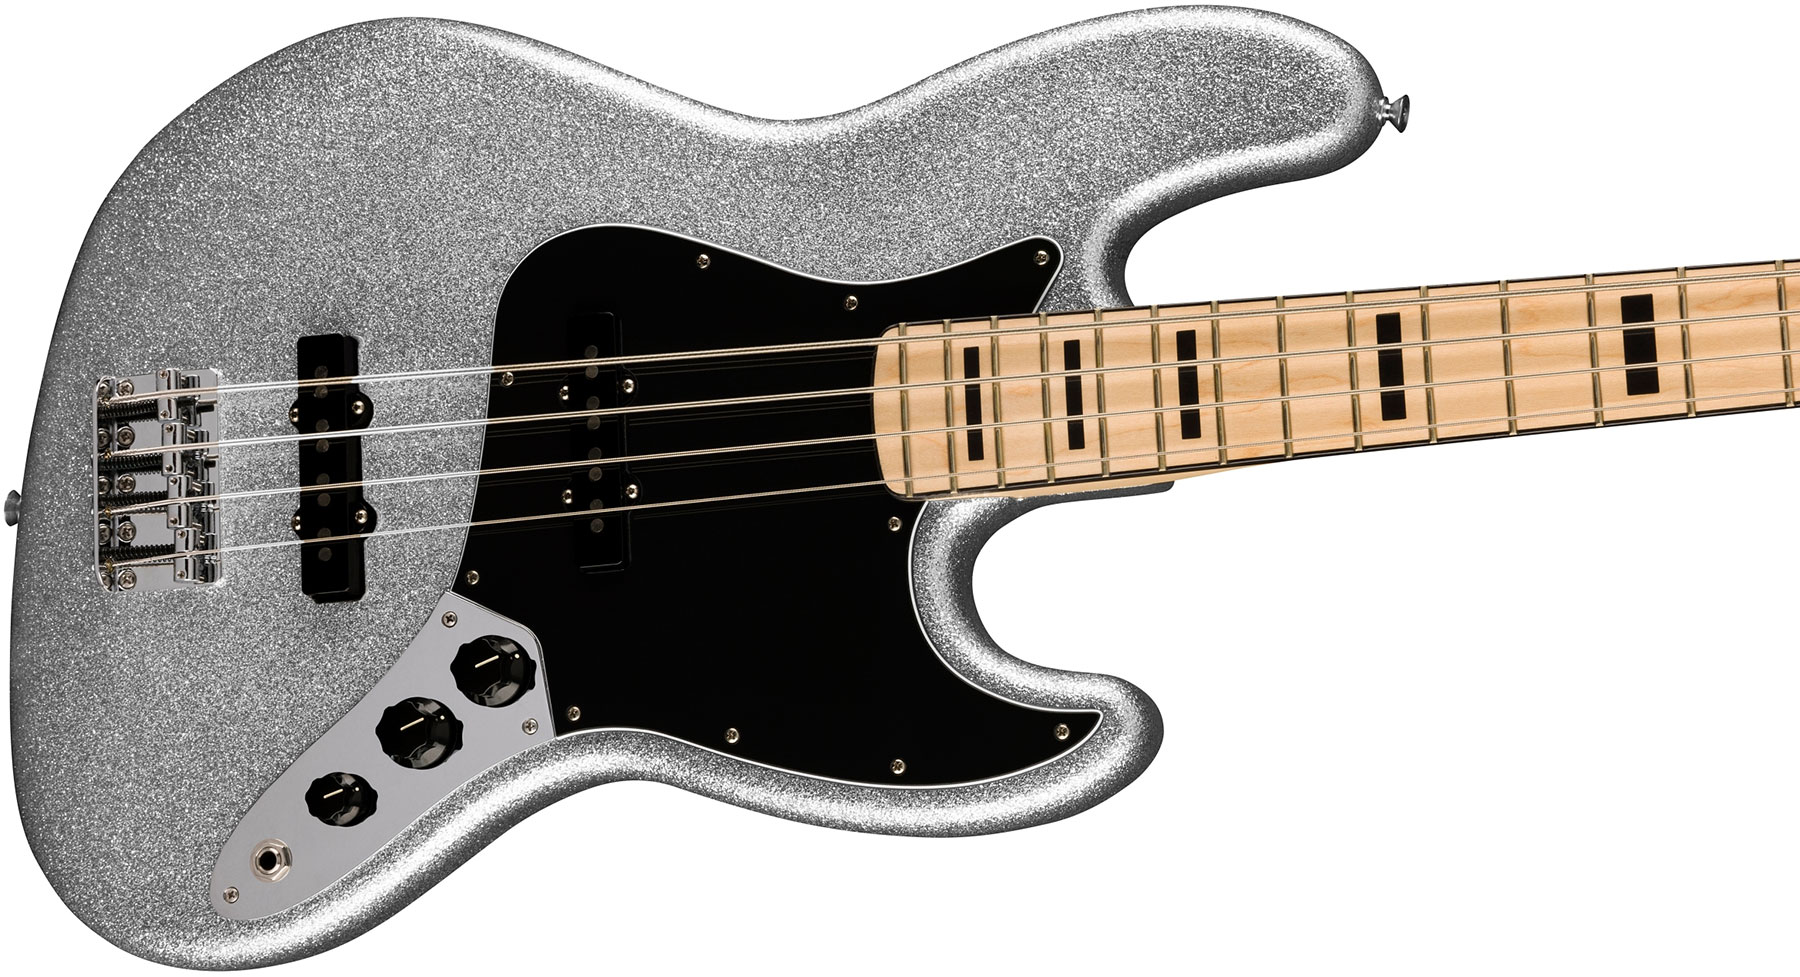 Fender Mikey Way Jazz Bass Ltd Signature Mex Mn - Silver Sparkle - Solid body electric bass - Variation 2